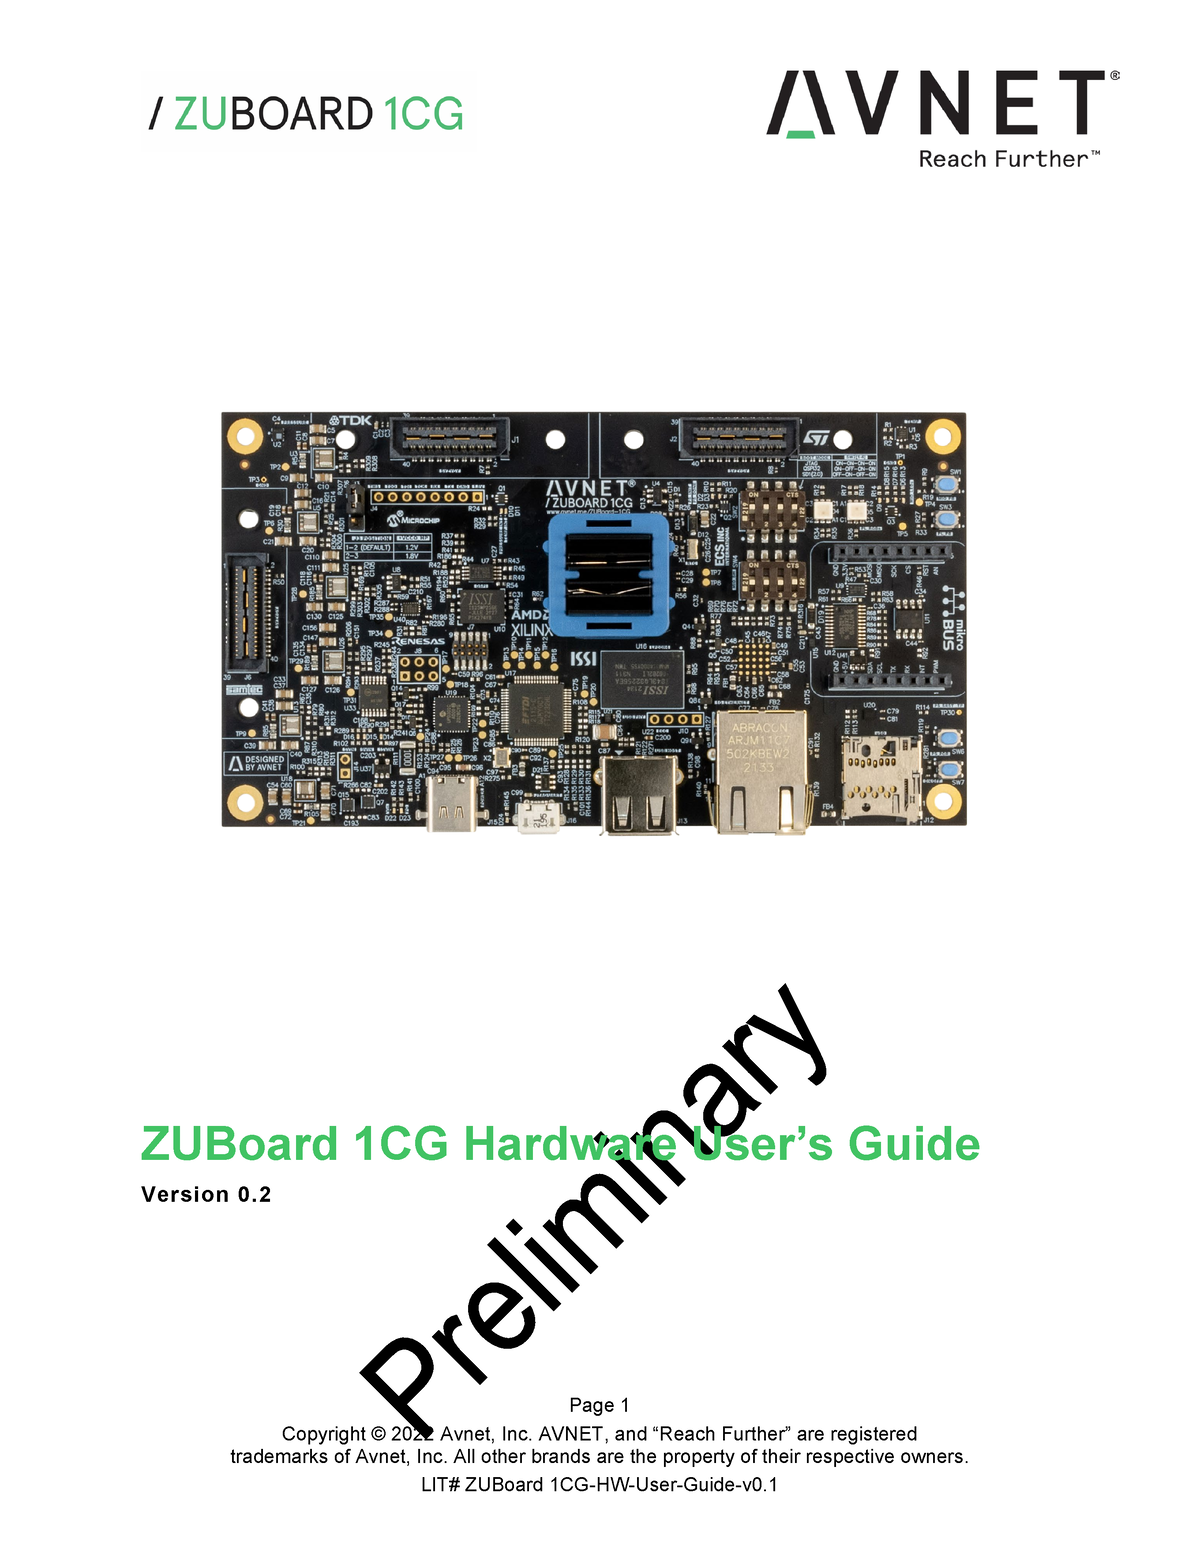 XBoard user guide